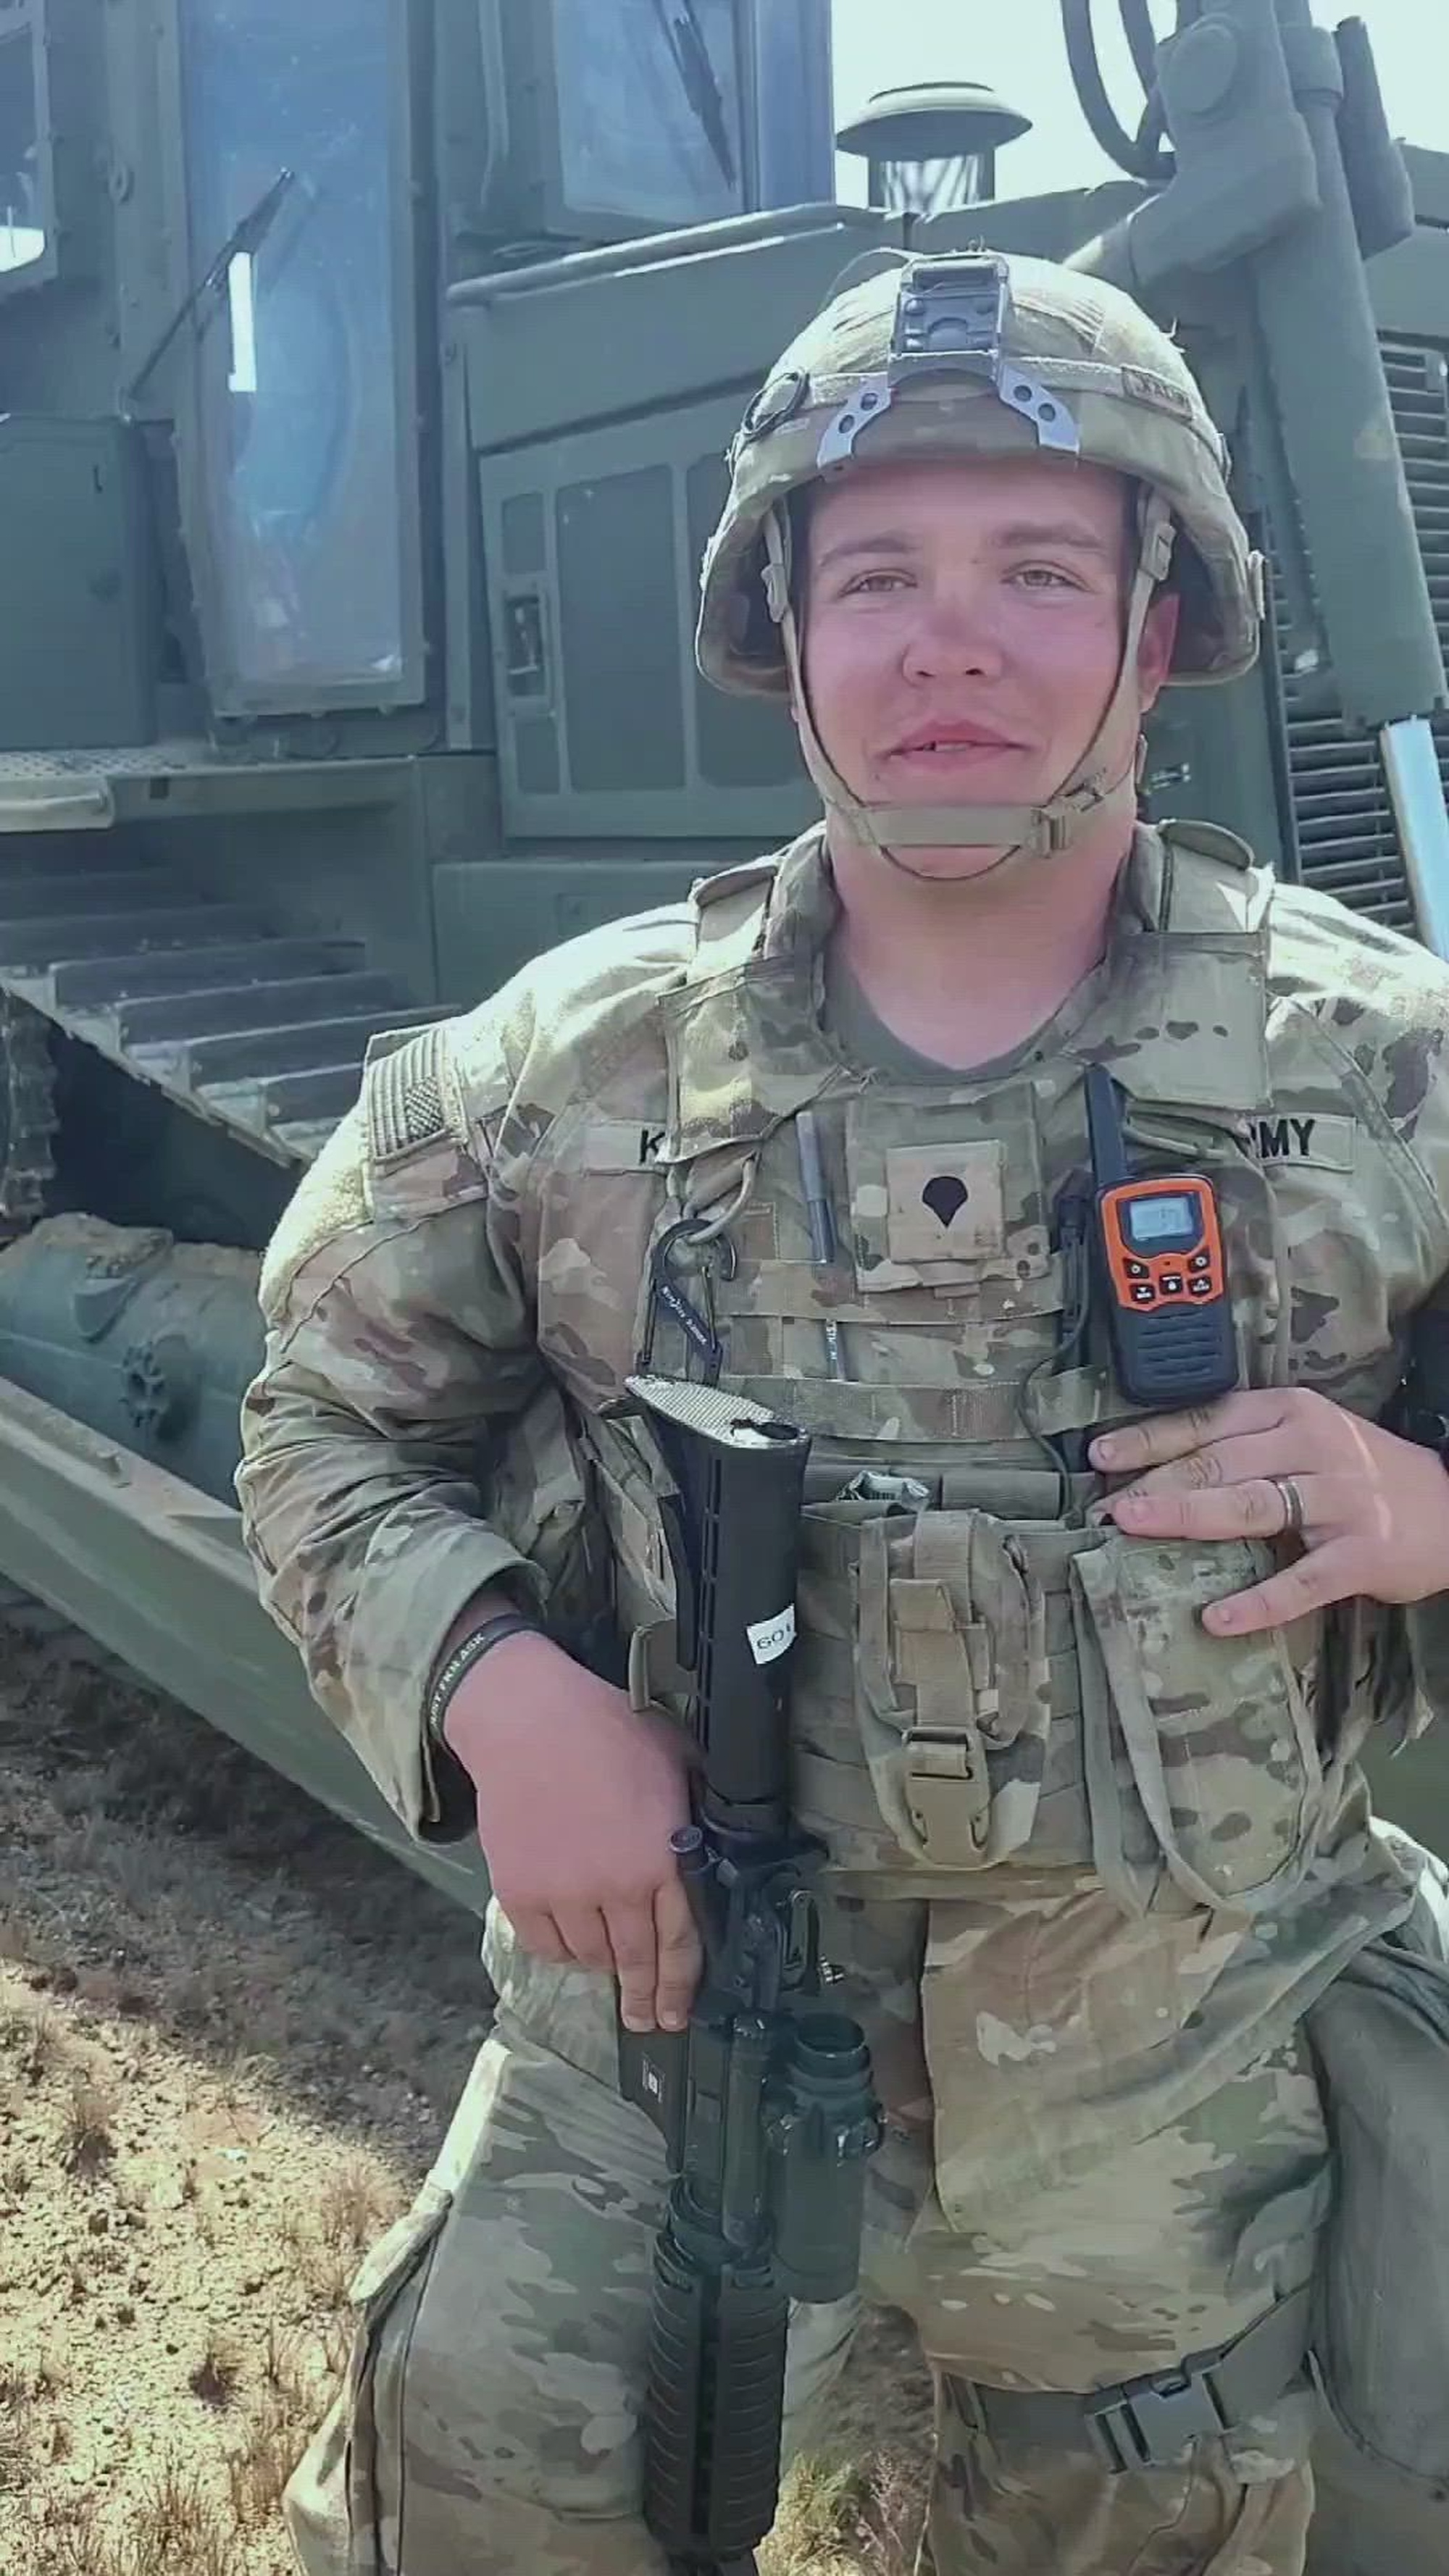 Meet Spc. Alyjiah Kalin, a horizontal construction engineer with the 43rd Multi-Role Bridge Company, 20th Engineer Battalion, 36th Engineer Brigade. Kalin was deployed to the Drawsko Combat Training Center, Poland, in support of Immediate Response 24, May 7, 2024.  

The Texas-based unit assisted in a wet gap crossing exercise, which facilitates movement of equipment and troops across a water obstacle, such as a lake or river, in a tactical environment. Kalin and his team used the Army’s D7R-Type 2 heavy equipment vehicle to move earth and clear routes in preparation for the crossing. Then multi-bay rafts and ramp structures are set up and able to ferry the items across the water to keep operations moving.  

“If you like playing with big Tonka toys, pushing dirt and working outside, it’s one of the best jobs you can get,” tells Kalin.

Kalin, a native of Tampa, FL, is using the experience he gains in the military to plan his future endeavors. 

“My grandfather previously owned his own construction company,” he explained. “He just retired and I would love to open my own construction company like him.”

For now, Spc. Kalin is happy doing what he’s doing with his engineer unit.

“At the end of the day, you’re doing what most people wish they could do,” he said.

DEFENDER is a Dynamic Employment of Forces to Europe for NATO Deterrence and Enhanced Readiness, and is a U.S. European Command scheduled, U.S. Army Europe and Africa conducted exercise that consists of Saber Strike, Immediate Response, and Swift Response. DEFENDER 24 is linked to NATO’s Steadfast Defender exercise, and DoD’s Large Scale Global Exercise, taking place from 28 March to 31 May. DEFENDER 24 is the largest U.S. Army exercise in Europe and includes more than 17,000 U.S. and 23,000 multinational service members from more than 20 Allied and partner nations, including Croatia, Czechia, Denmark, Estonia, Finland, France, Germany, Georgia, Hungary, Italy, Latvia, Lithuania, Moldova, Netherl